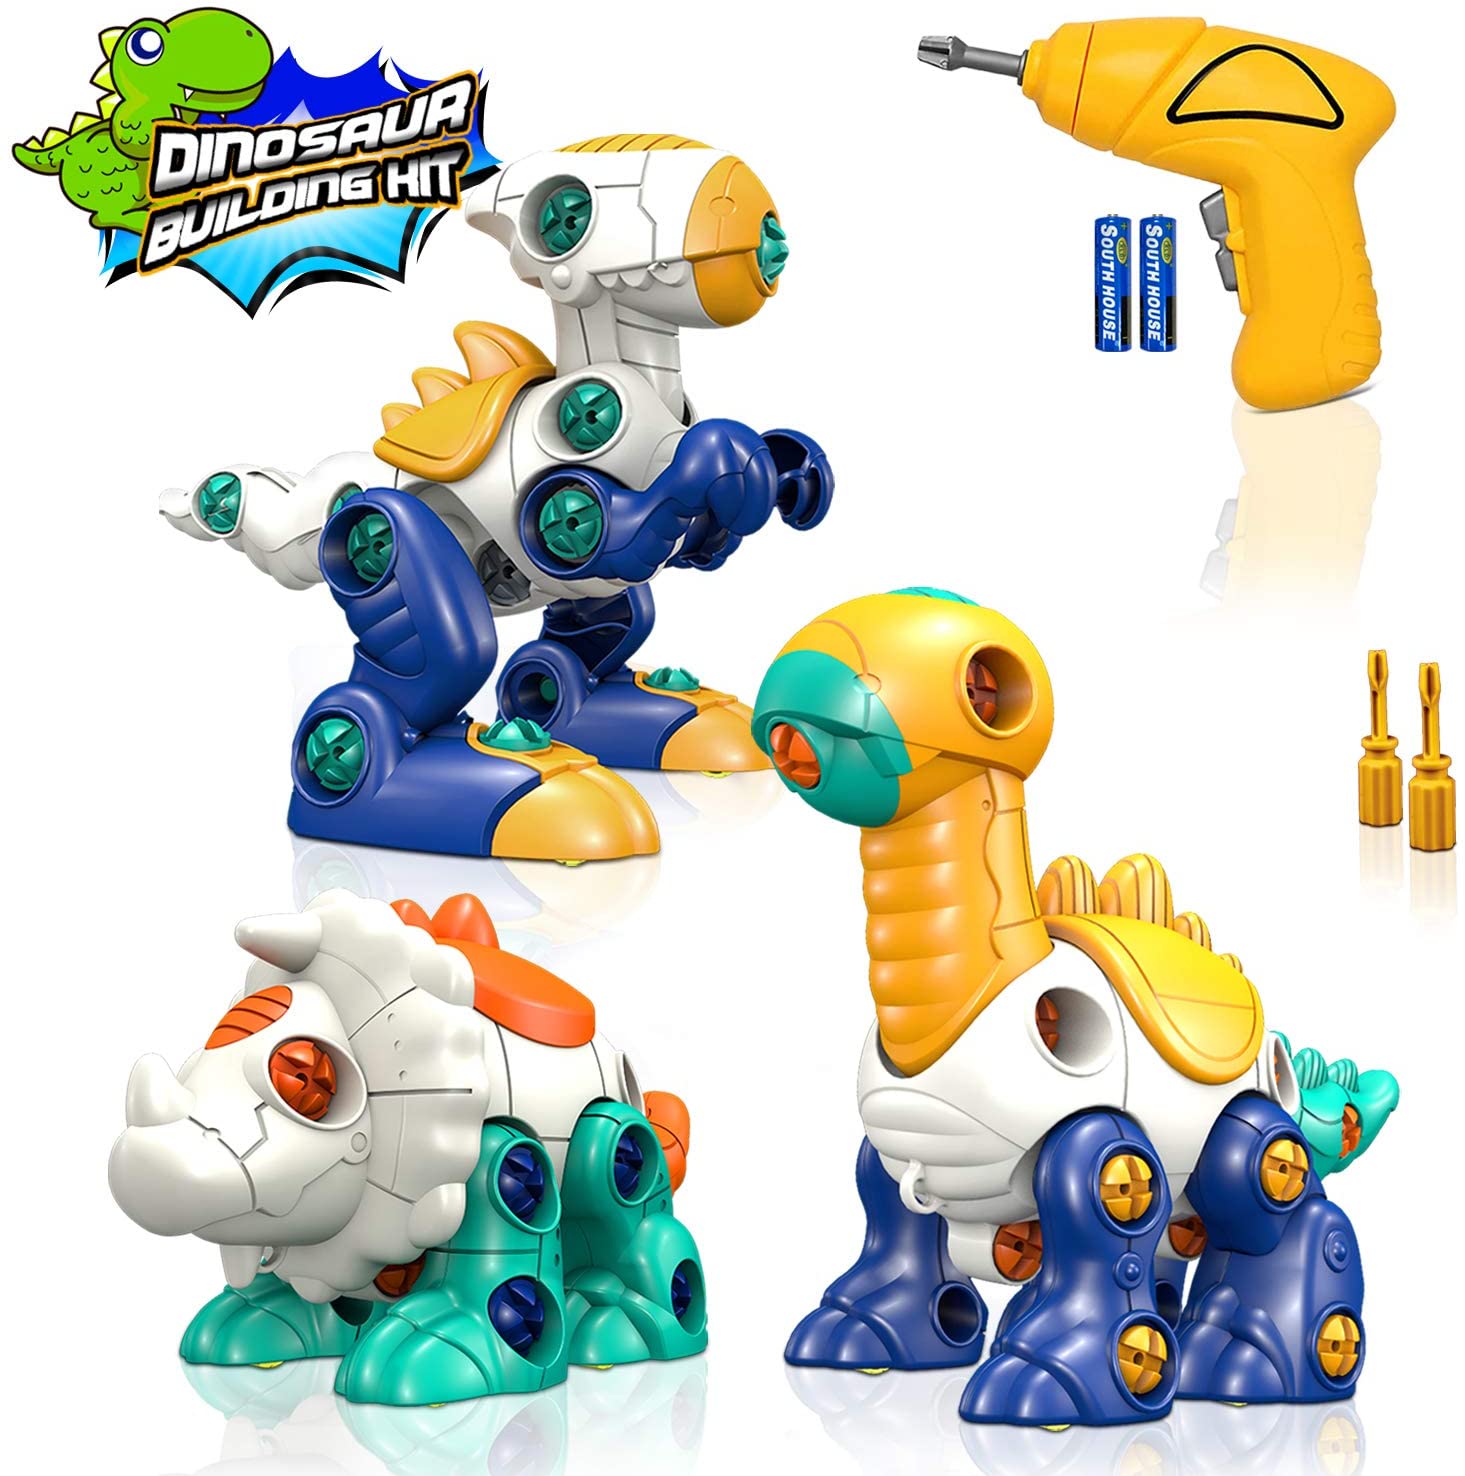 Ausut Stem Take Apart Toy Take Apart Dinosaur Toys for Kids - 3 Pack STEM Construction Building Toy Set with Electric Drill Tools, Educational Learning Games Play Kit Birthday Gifts for Boys Age 3 4 5 6 7 